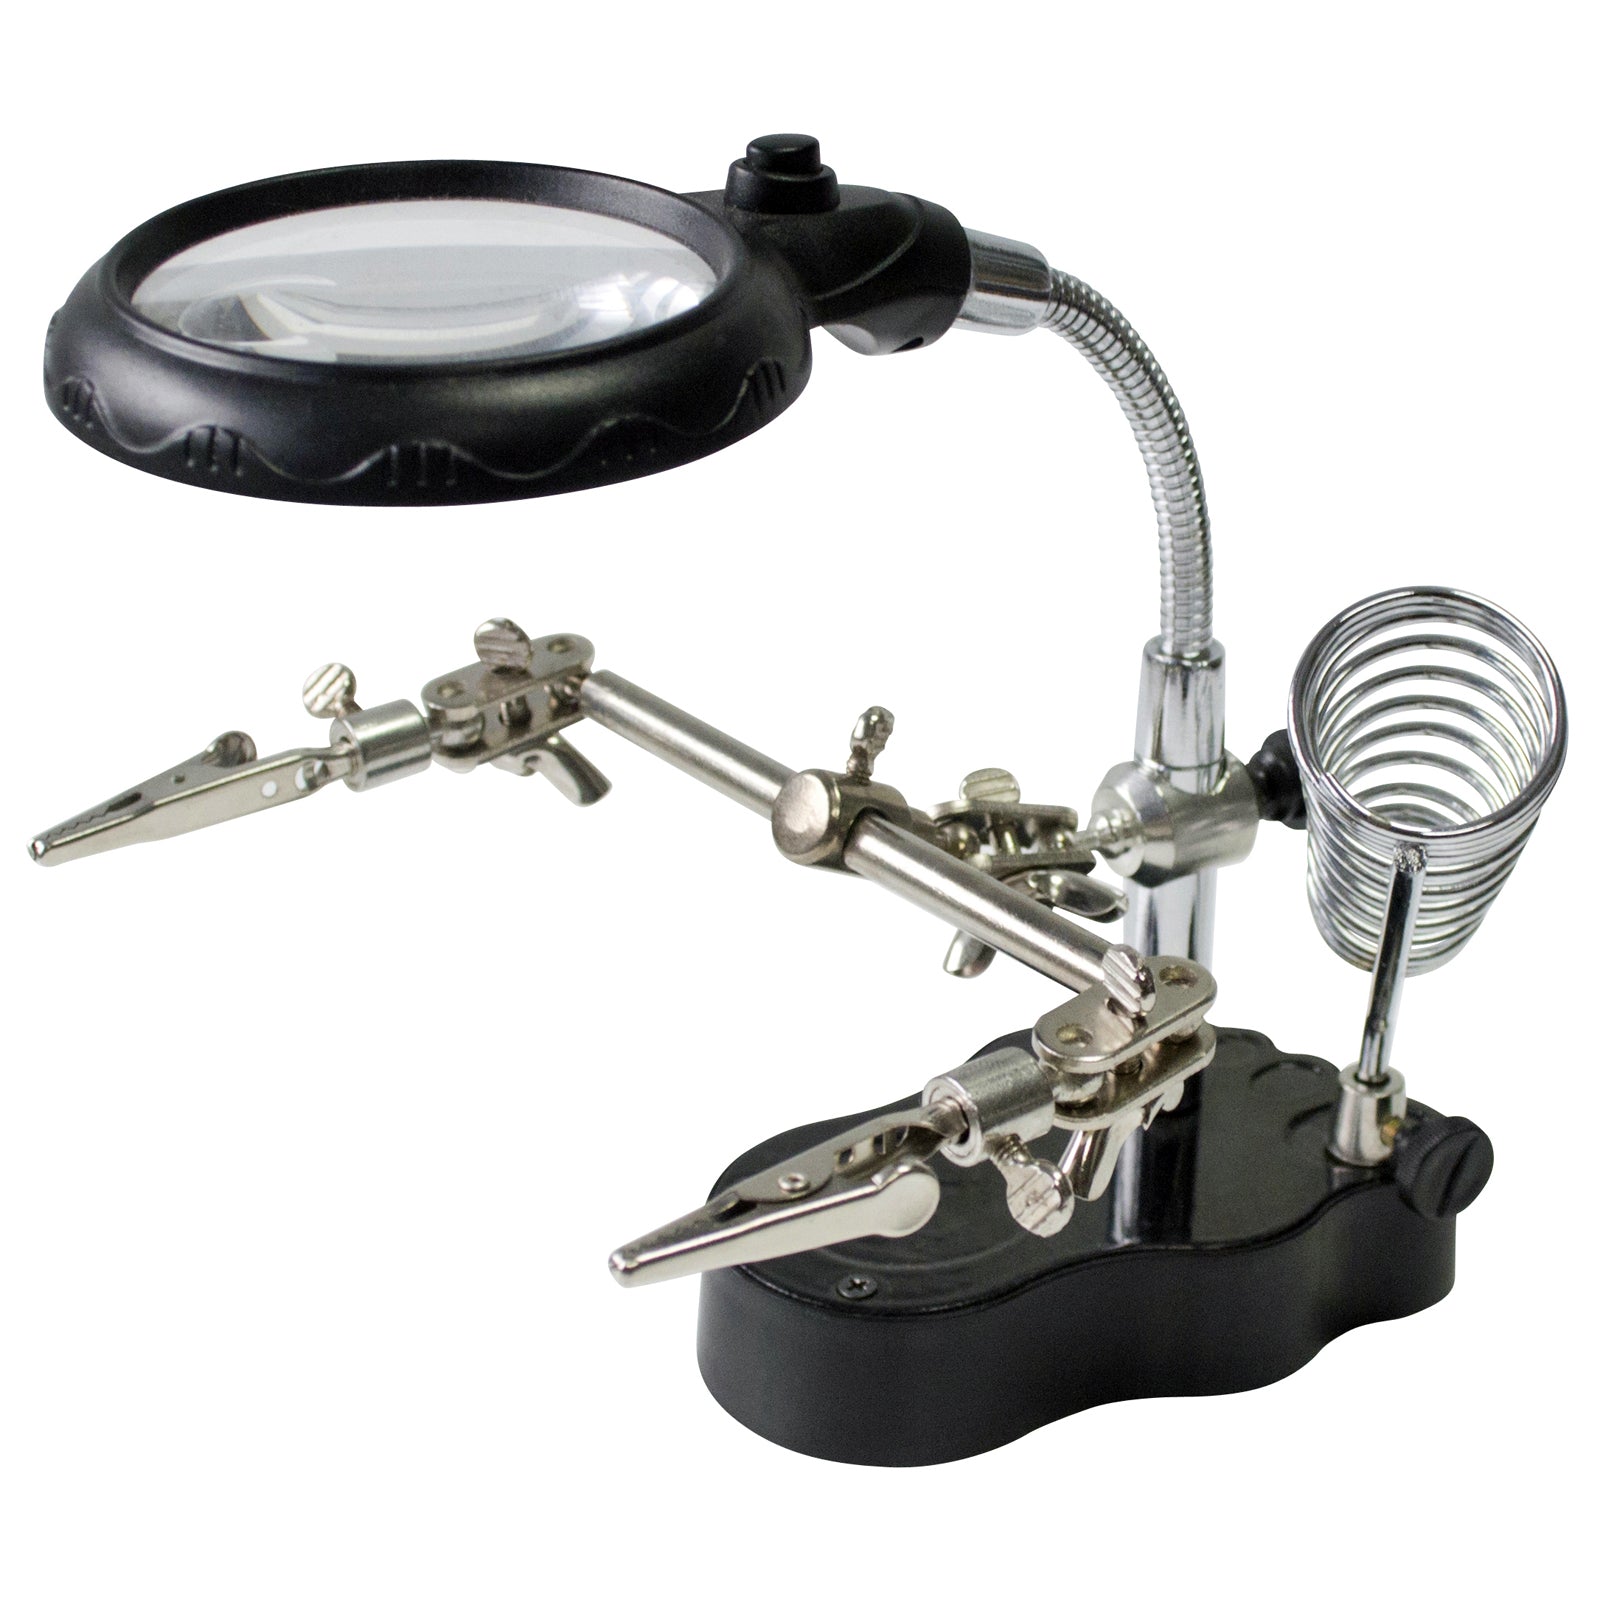 Amtech Helping Hand Magnifier With 2 LED Lights